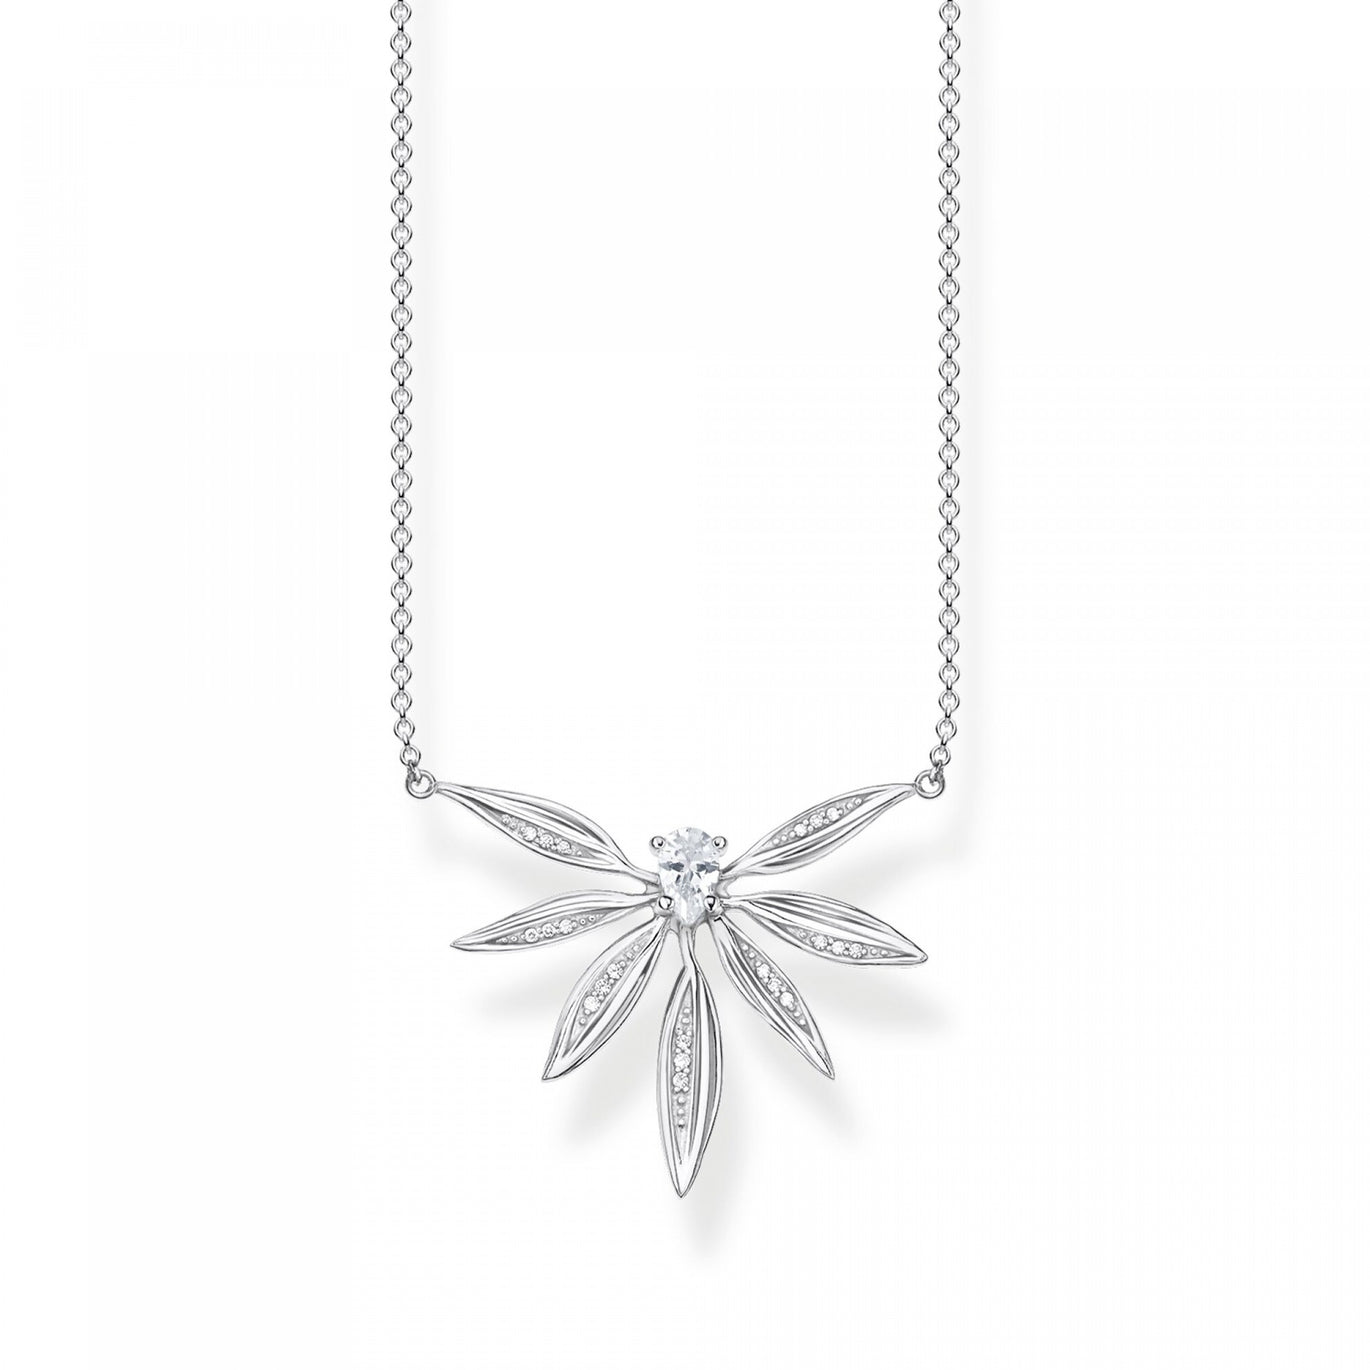 Thomas Sabo Leaves Necklace, Silver